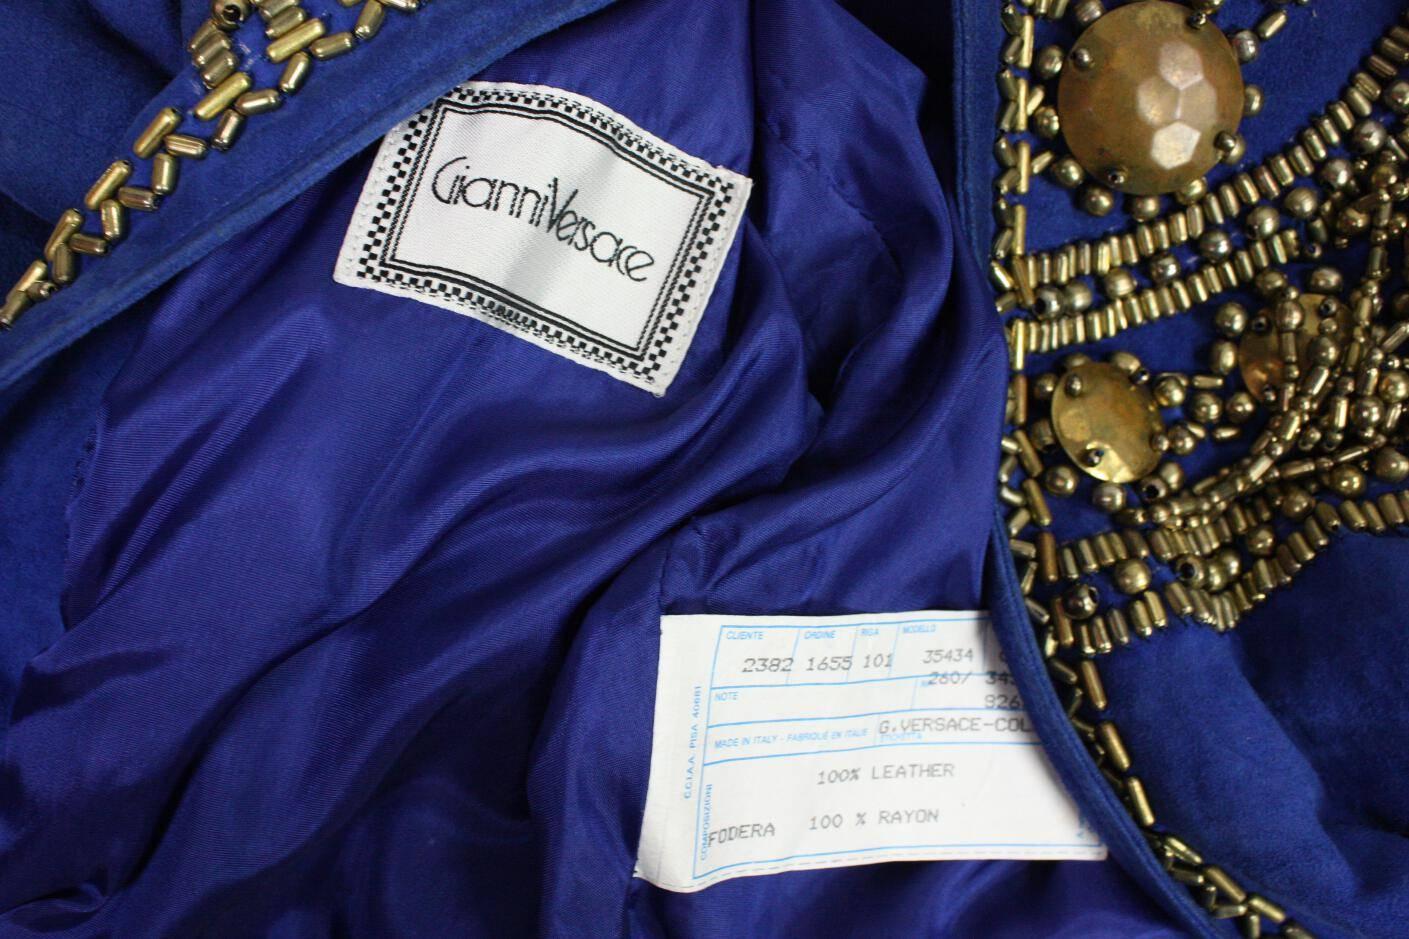 1990's Gianni Versace Beaded Blue Suede Jacket For Sale 4